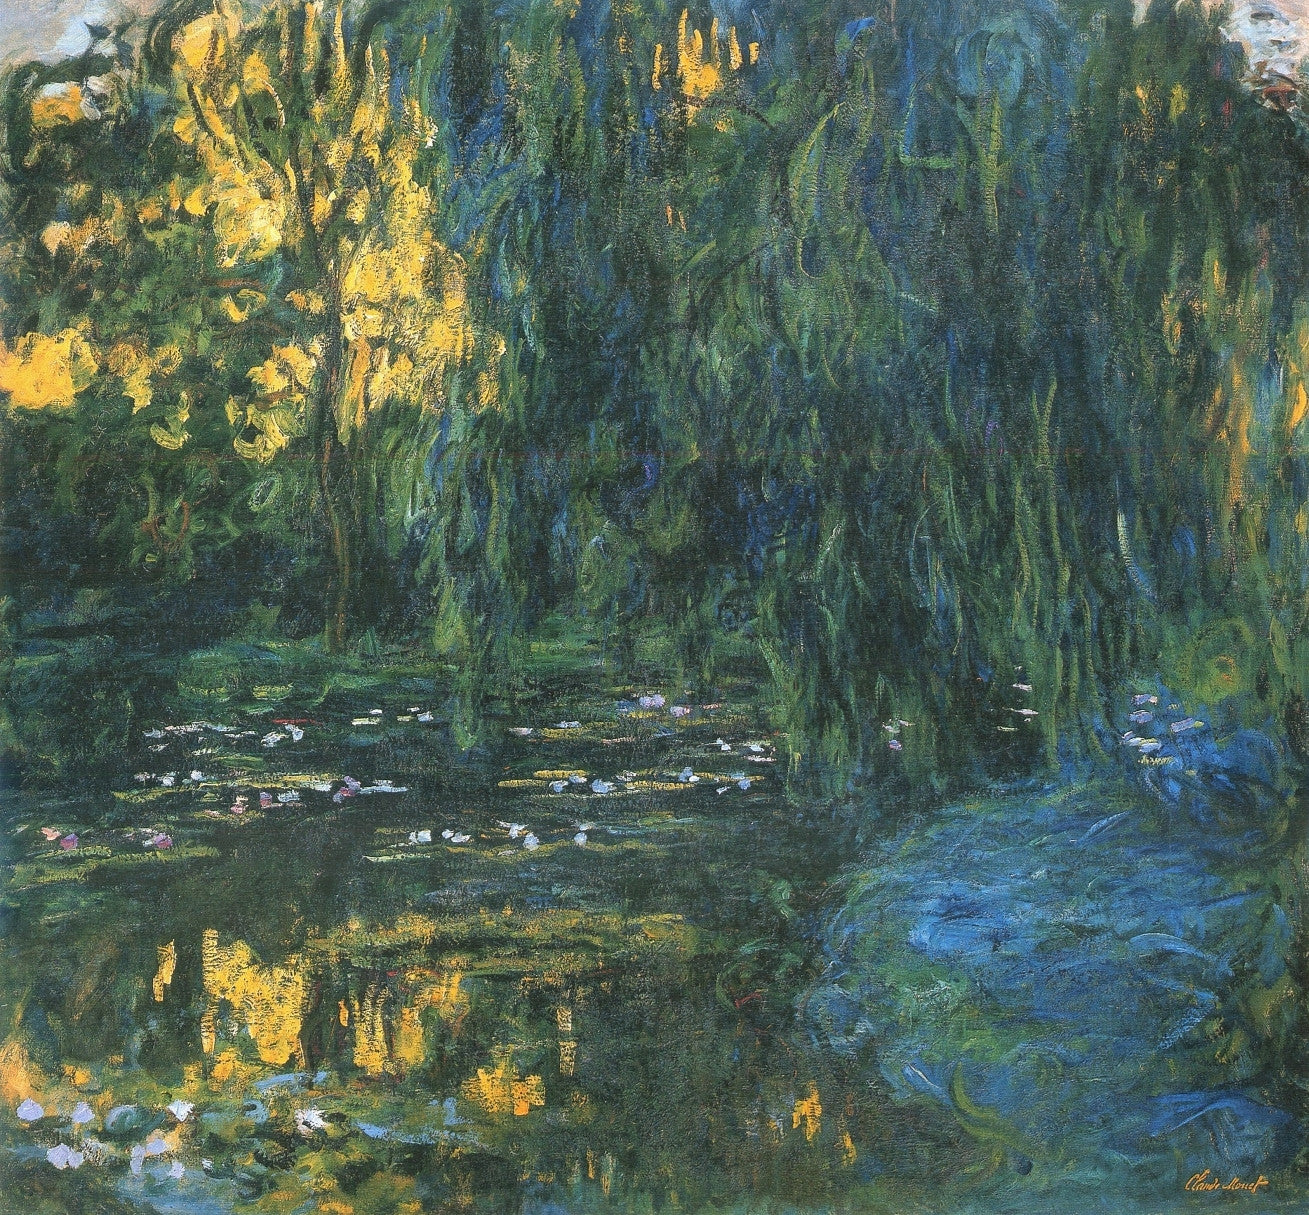 Claude Monet, Water Lily Pond and Weeping Willow